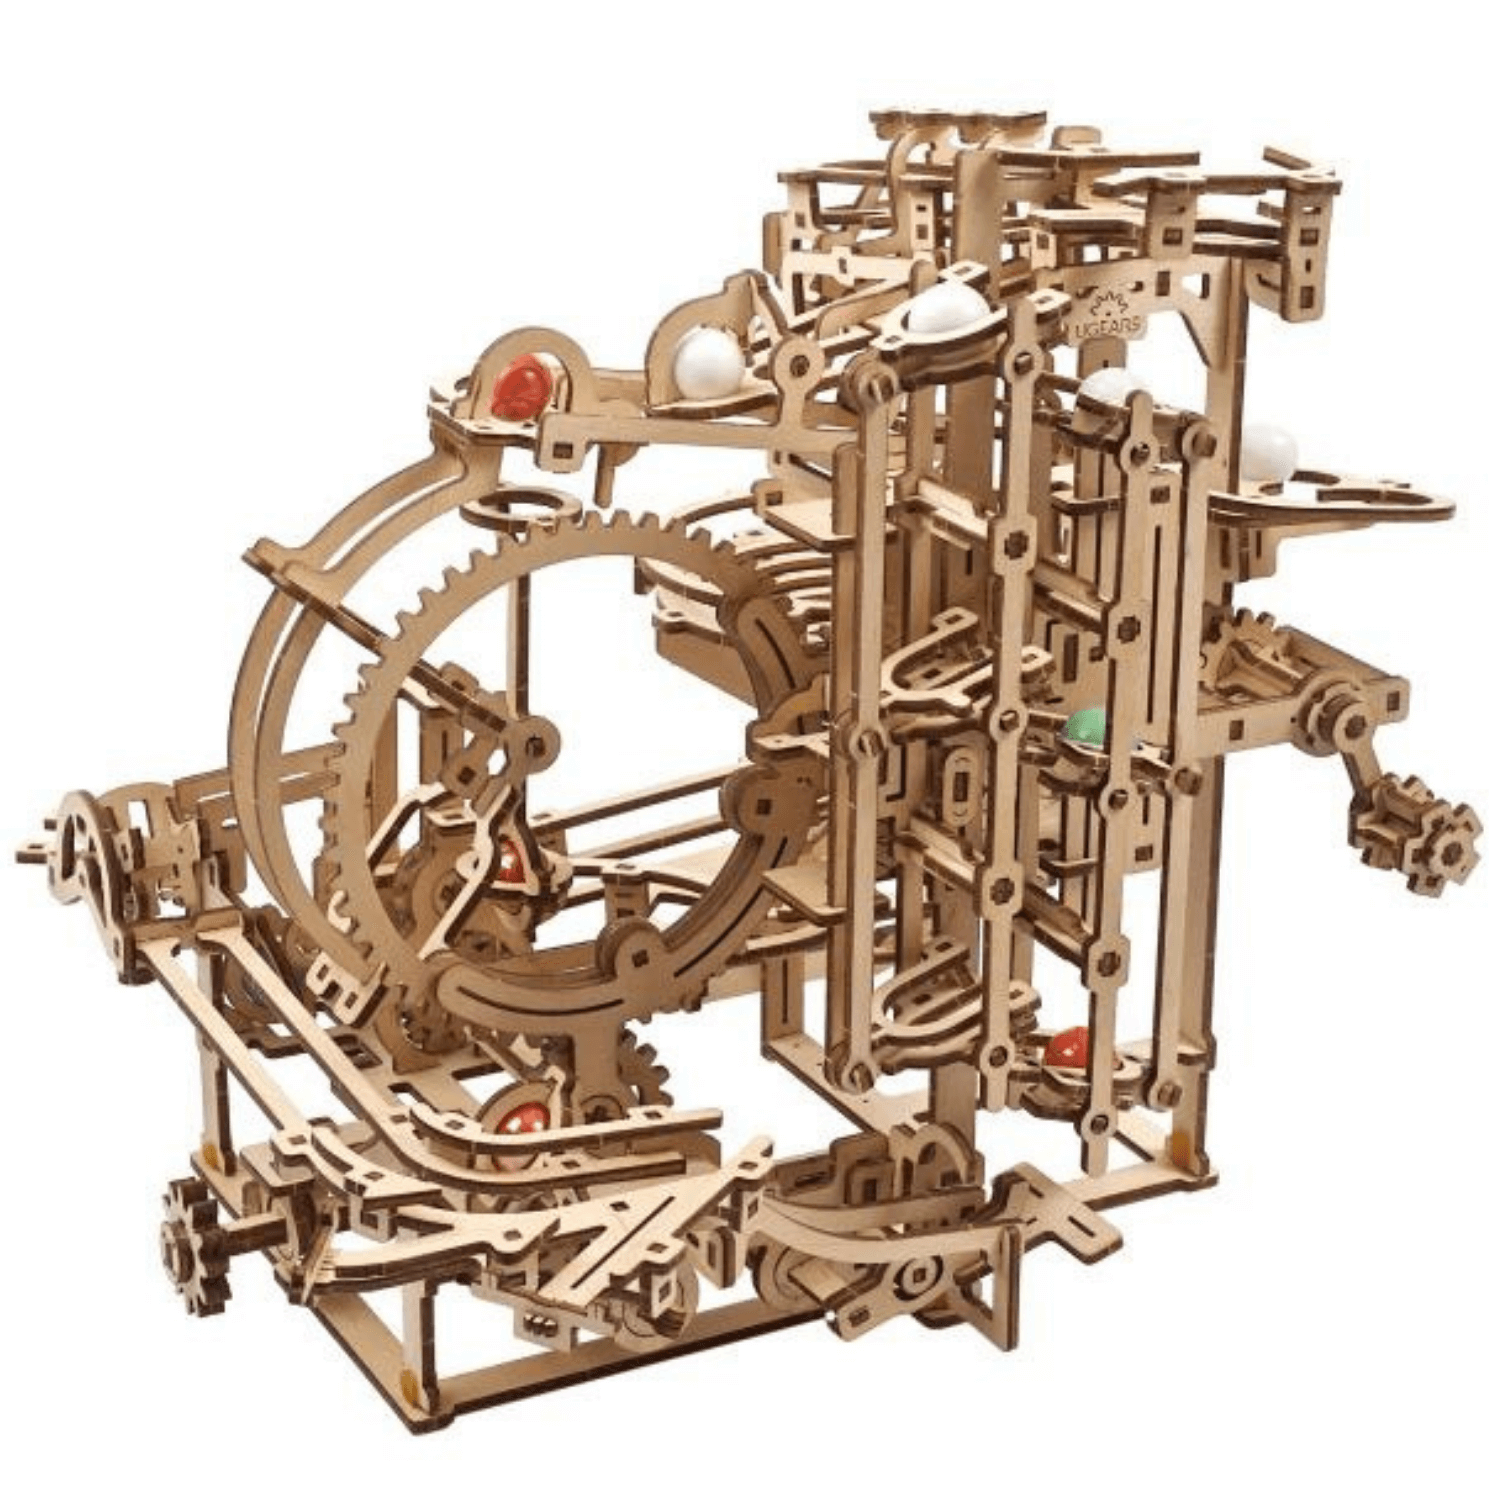 Marble Step Railway Model Kit-Mechanical Wooden Puzzle-Ugears-...